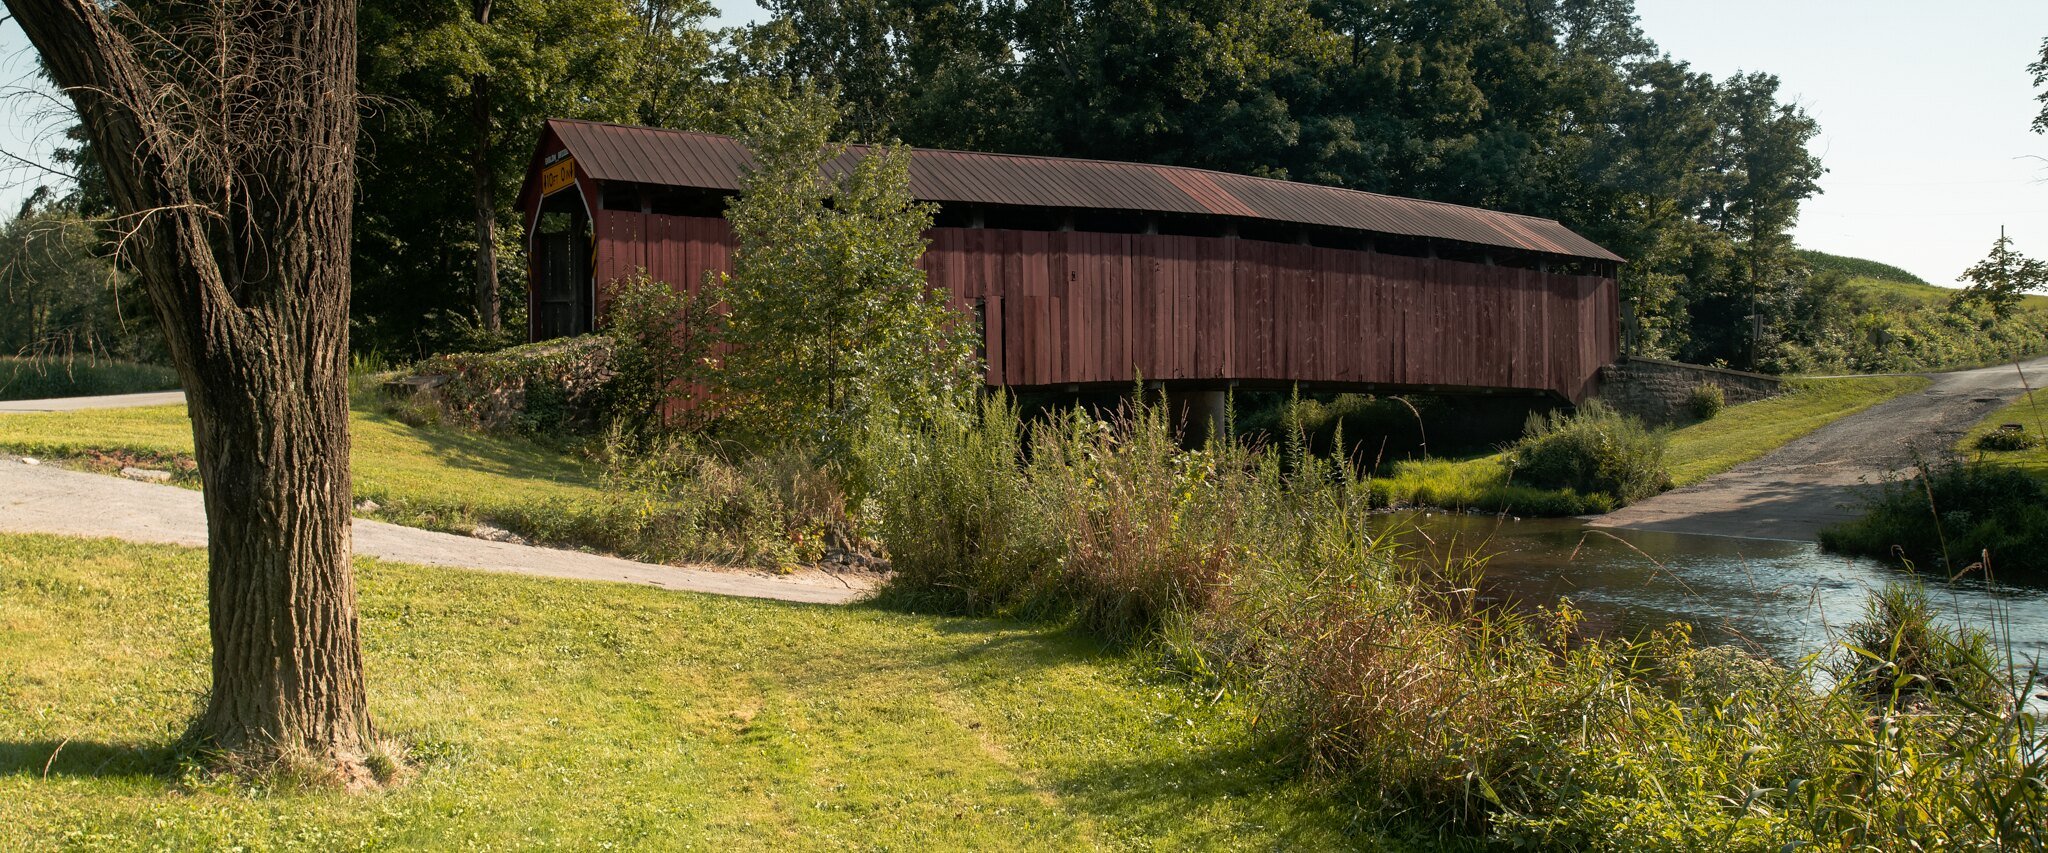  Enslow Covered Bridge in Jackson Township, Perry County, PA.  Built in 1904. 